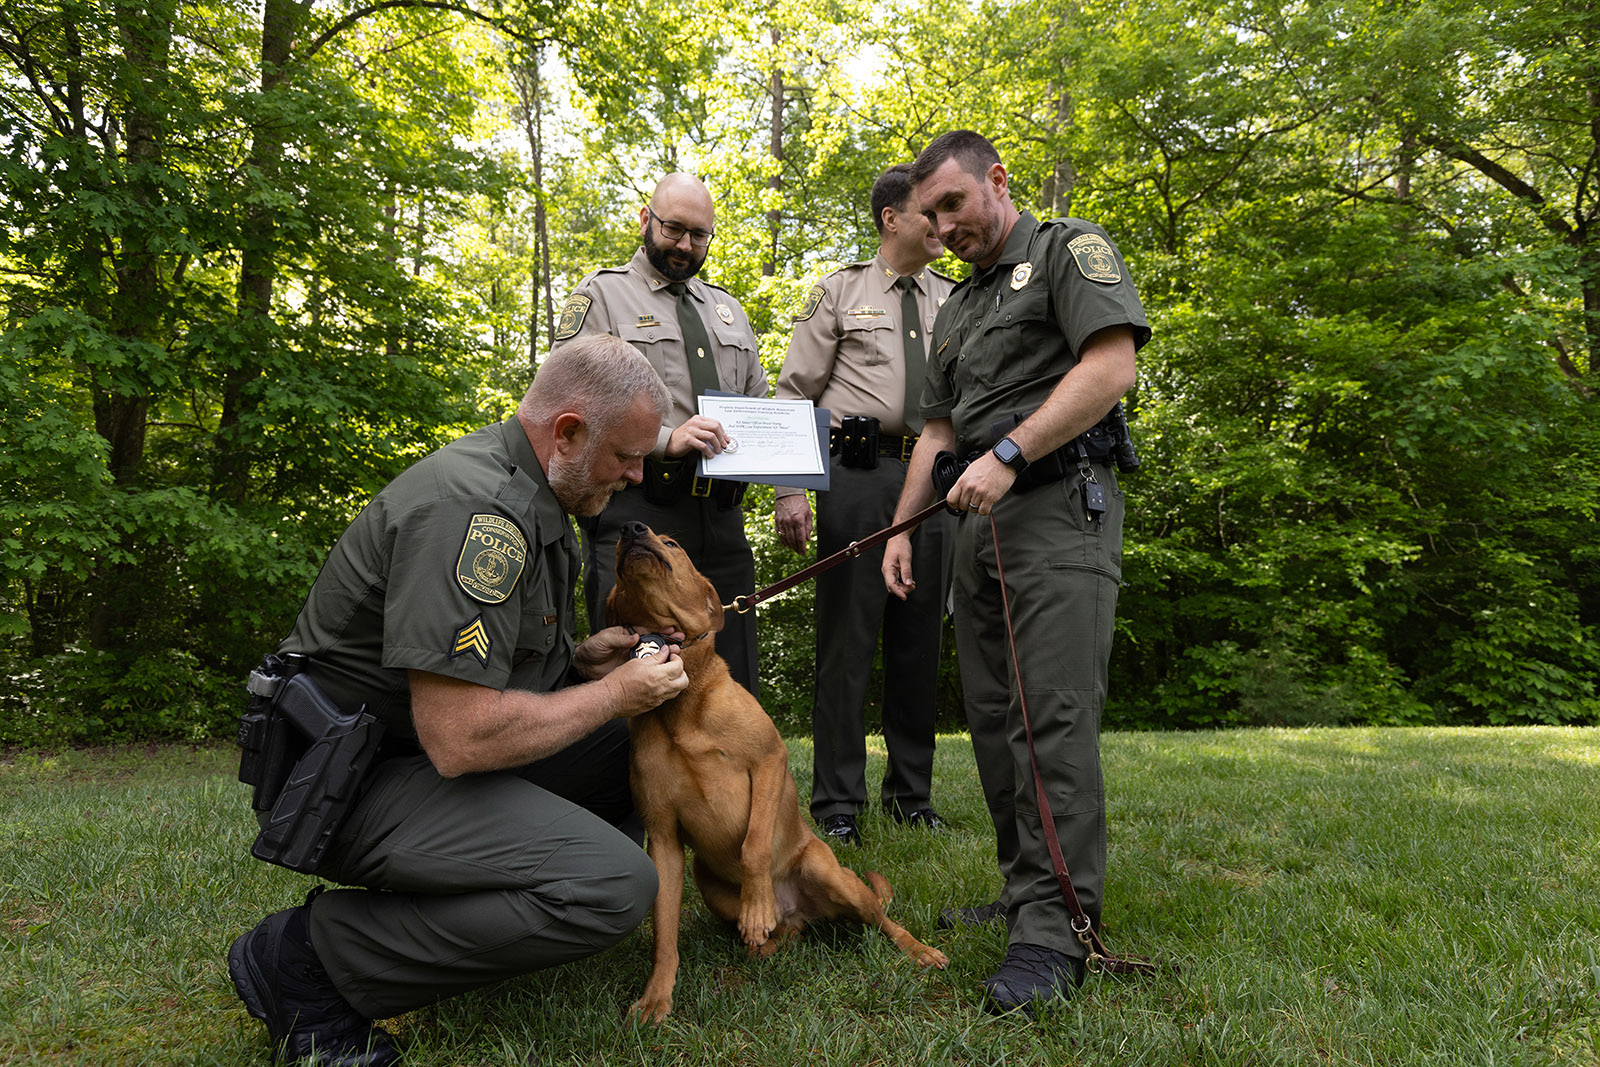 A photo of a uniformed law enforcement officer kneeling and attaching a badge to the collar of a Laborador retriever dog as another uniformed officer holds the leash.